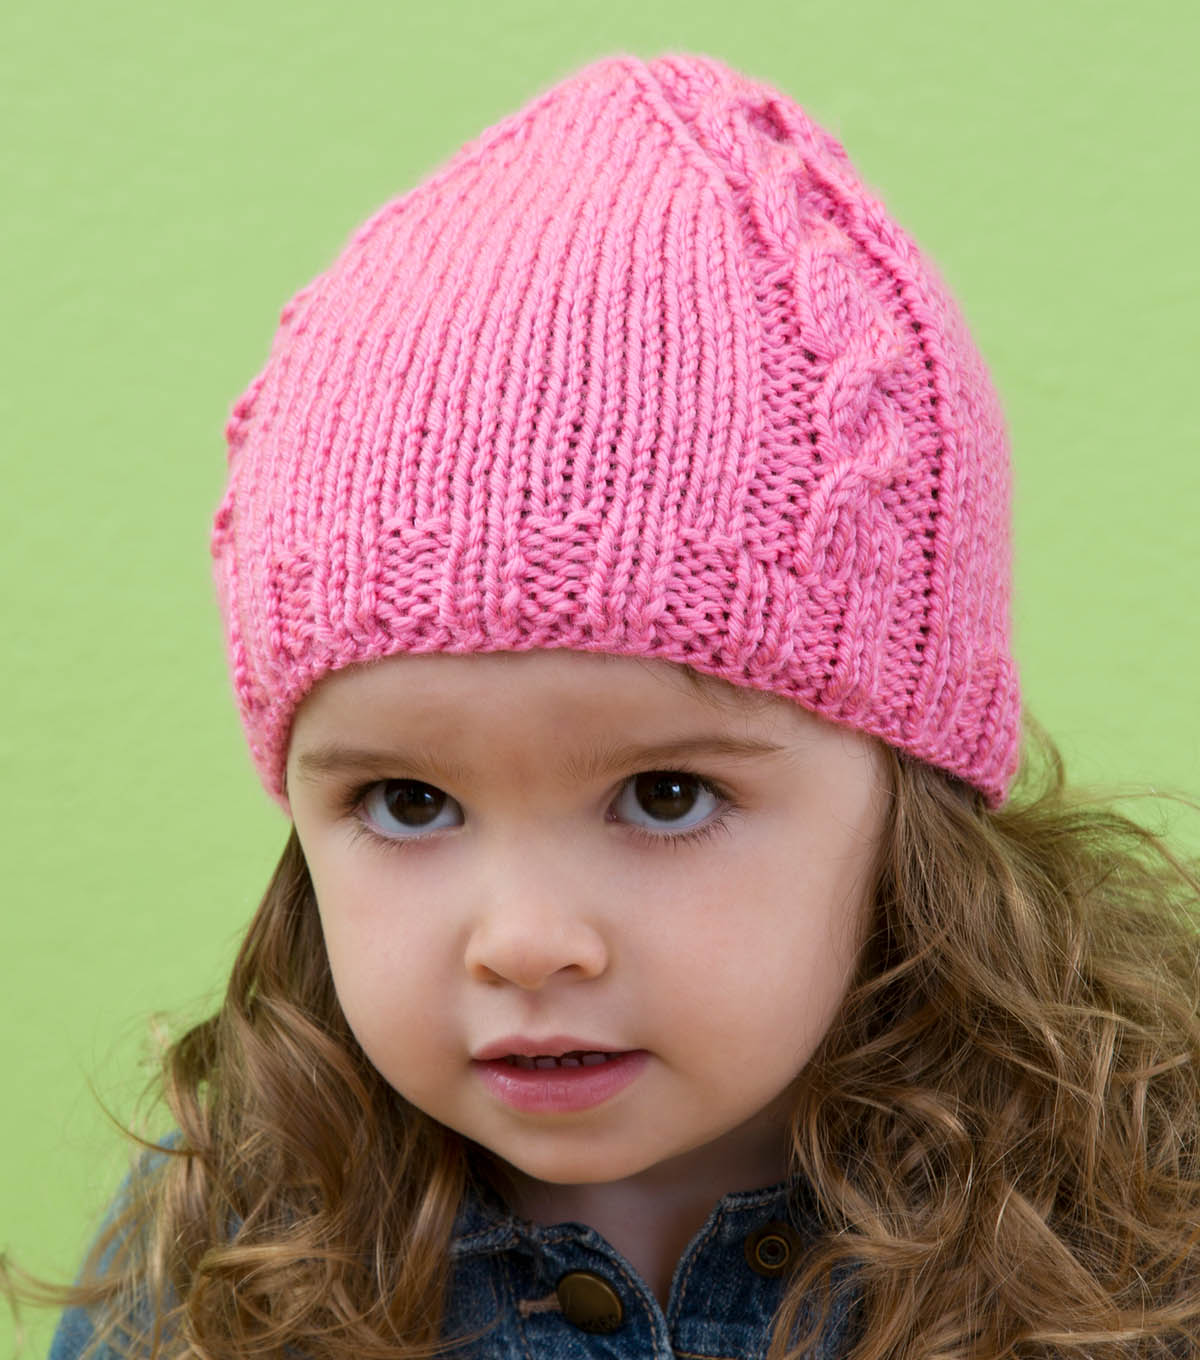 How To Knit A Cabled Baby Beanie Free Pattern